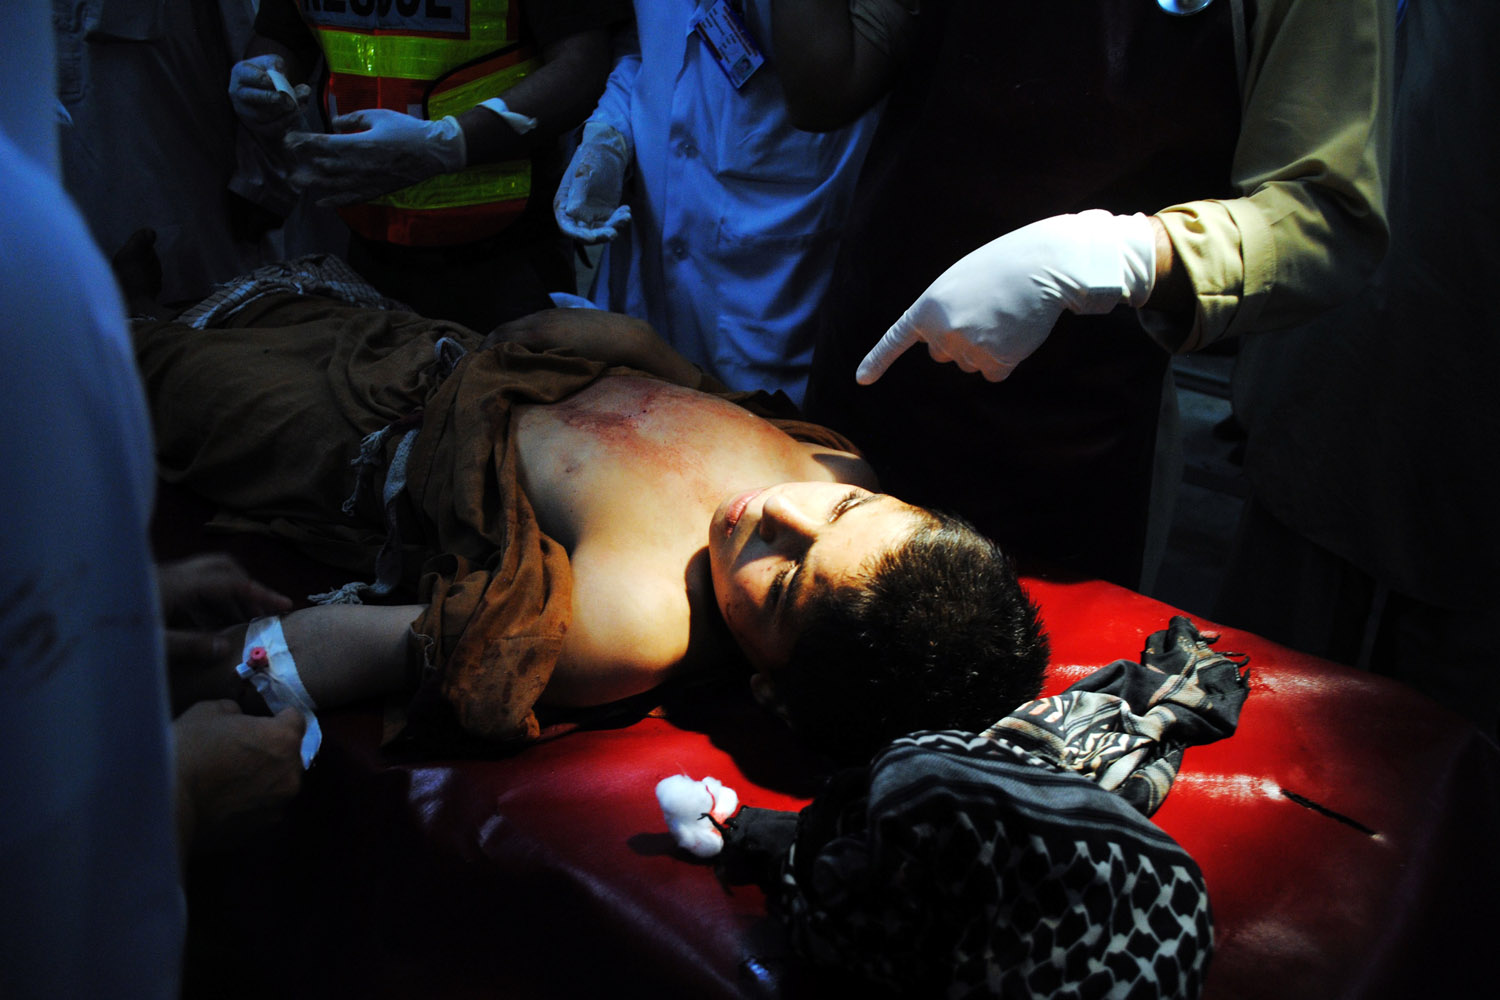 June 12, 2012. An injured boy receives medical treatment at a hospital in northwest Pakistan's Peshawar. At least two people were killed and several others injured when a bomb exploded in Peshawar on Tuesday, local media reported.